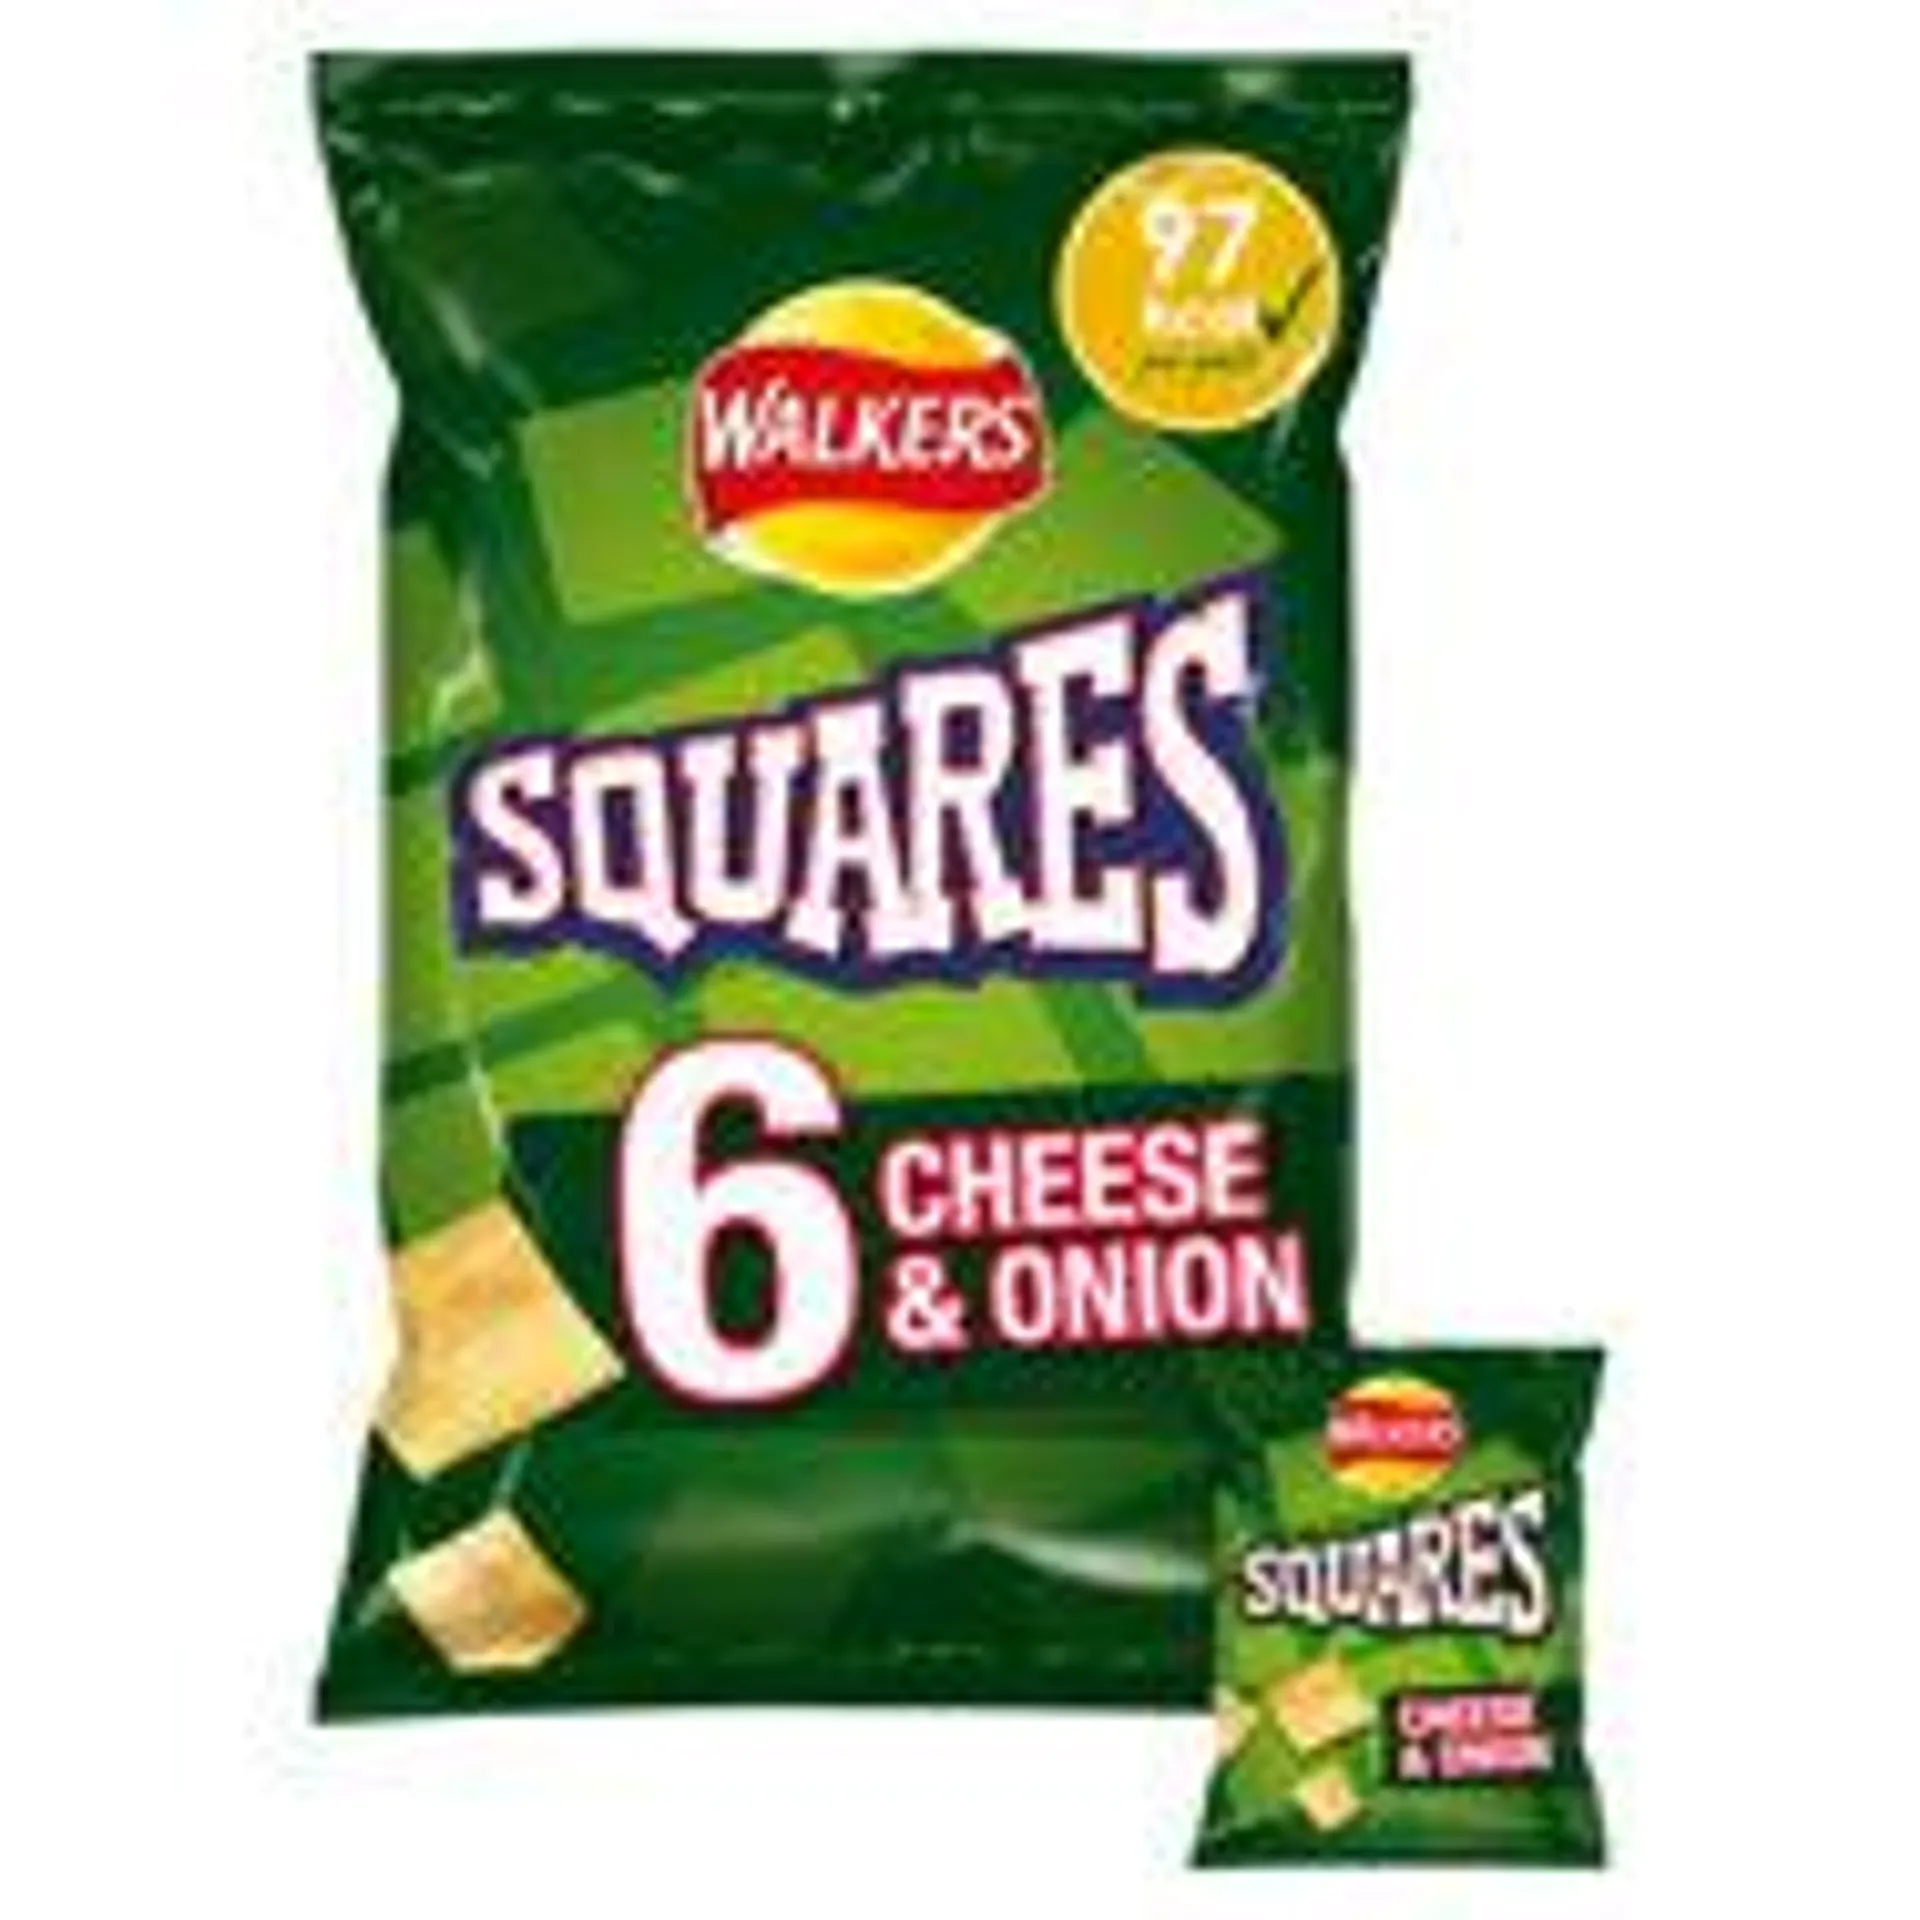 Walkers Squares Cheese & Onion Multipack Snacks Crisps 6x22g